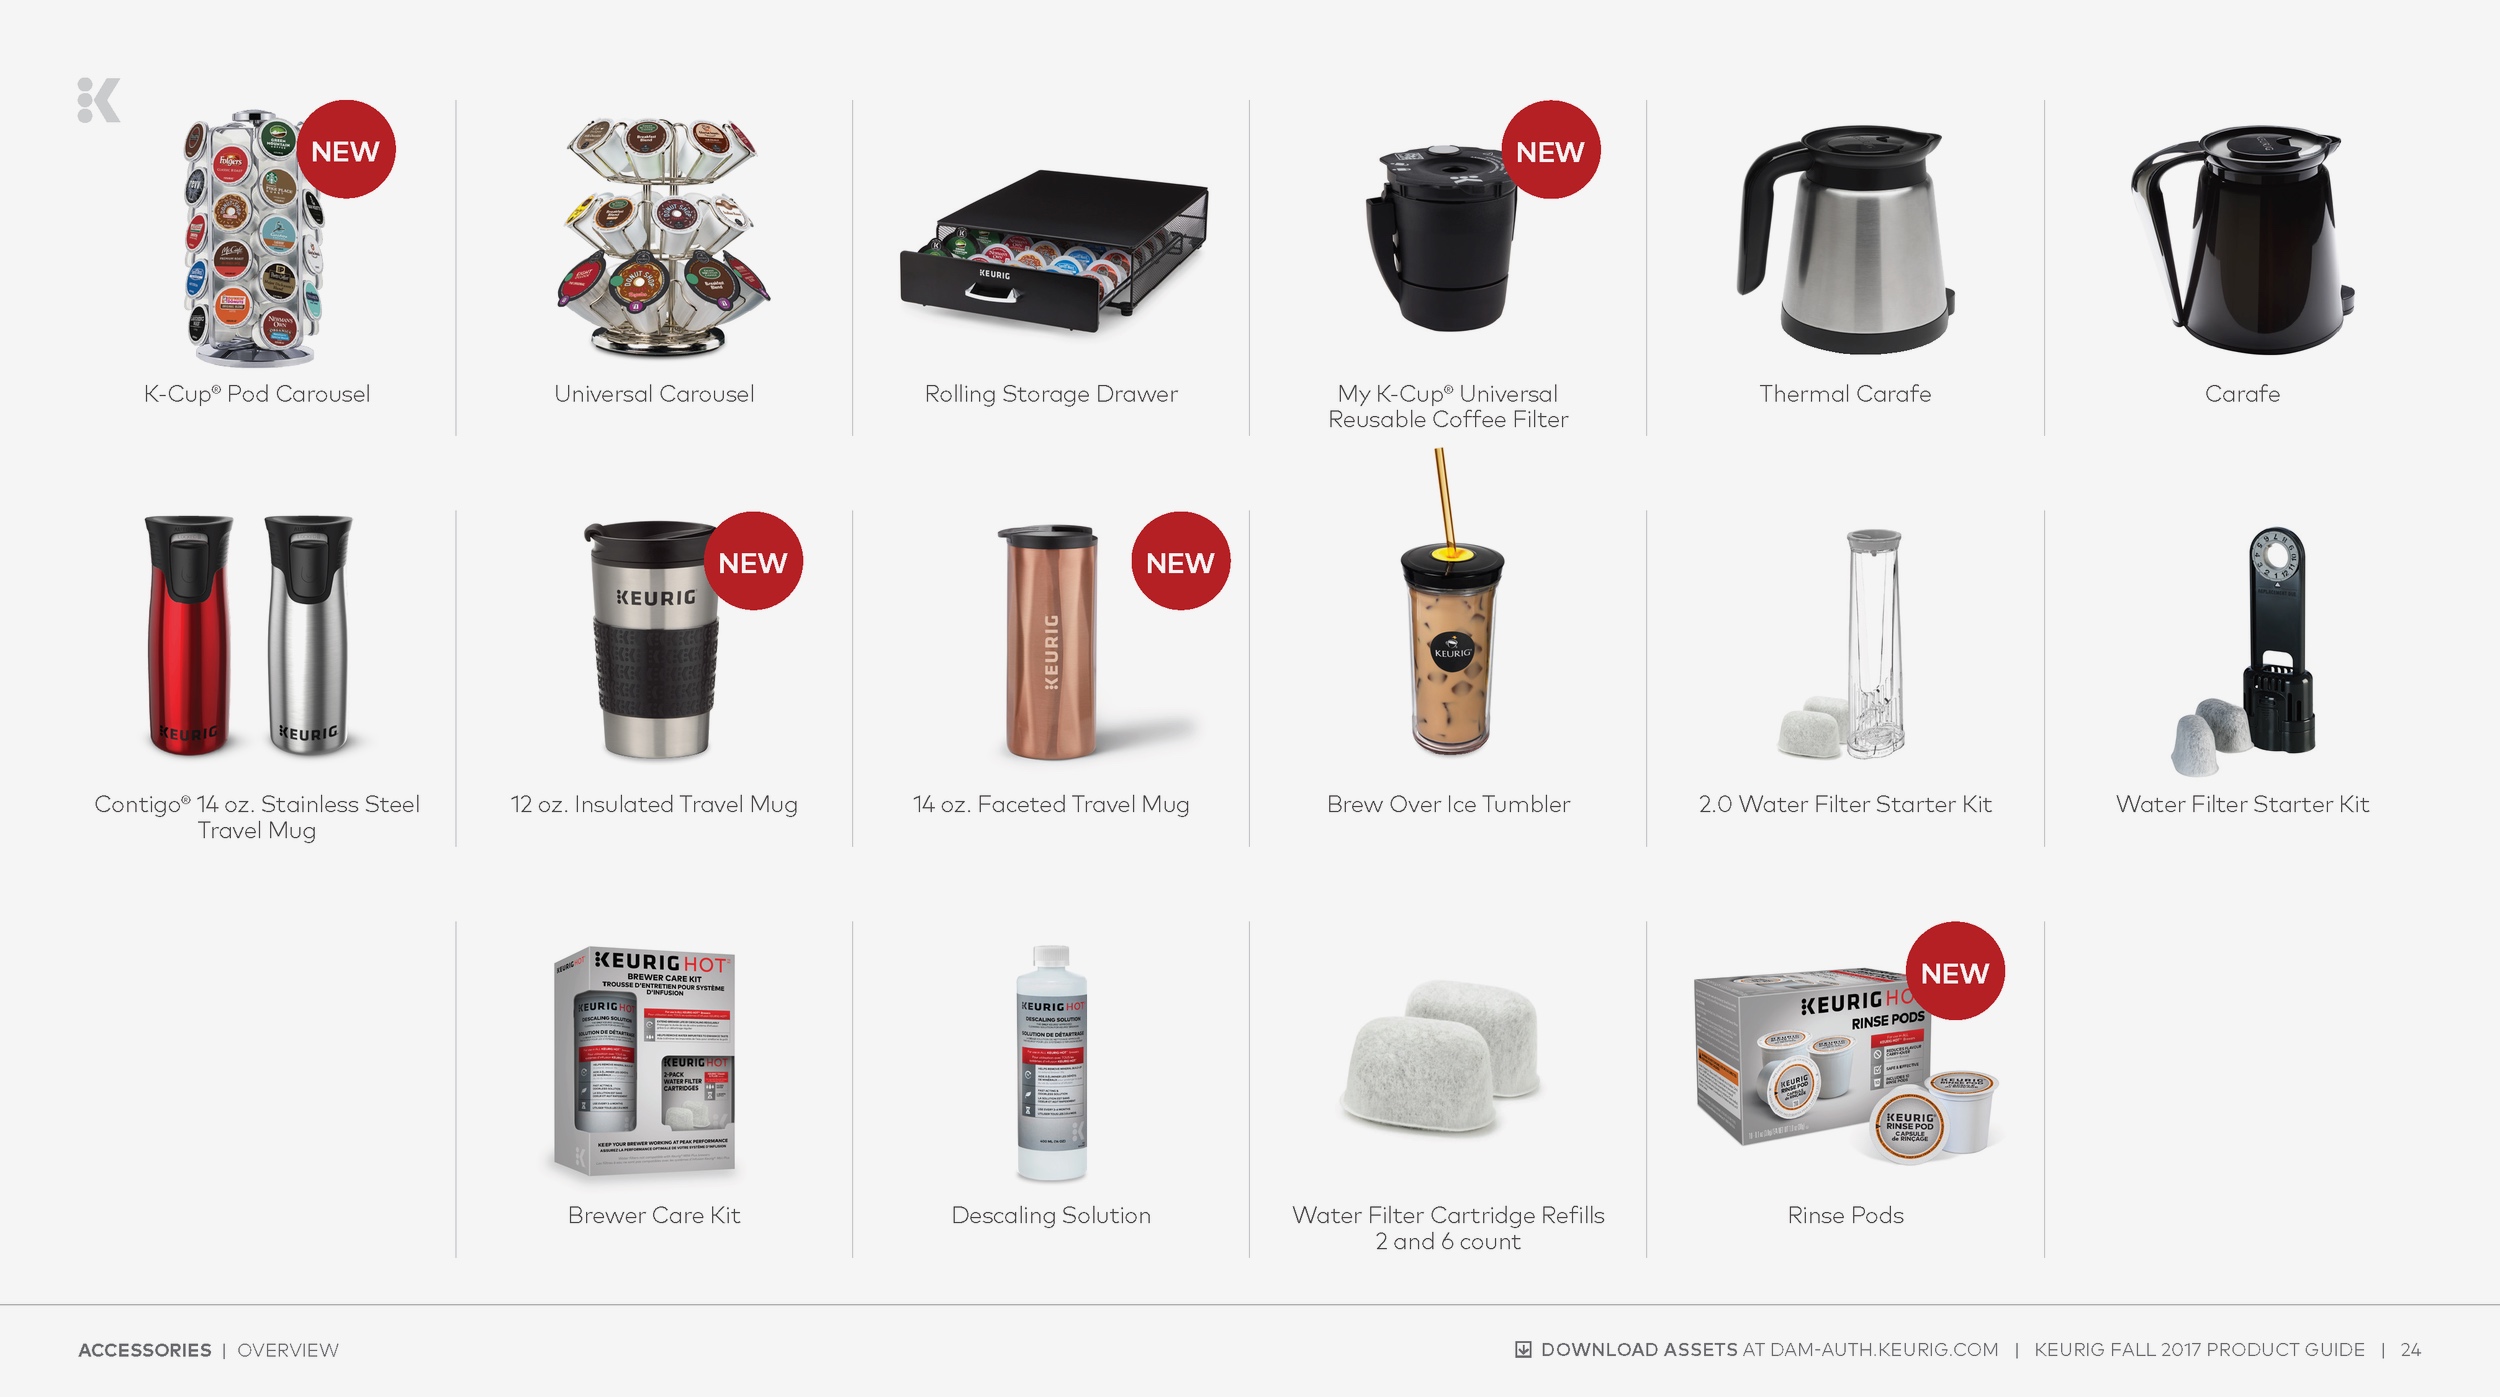 keurig_product_guide_F17_R8_Page_24.png